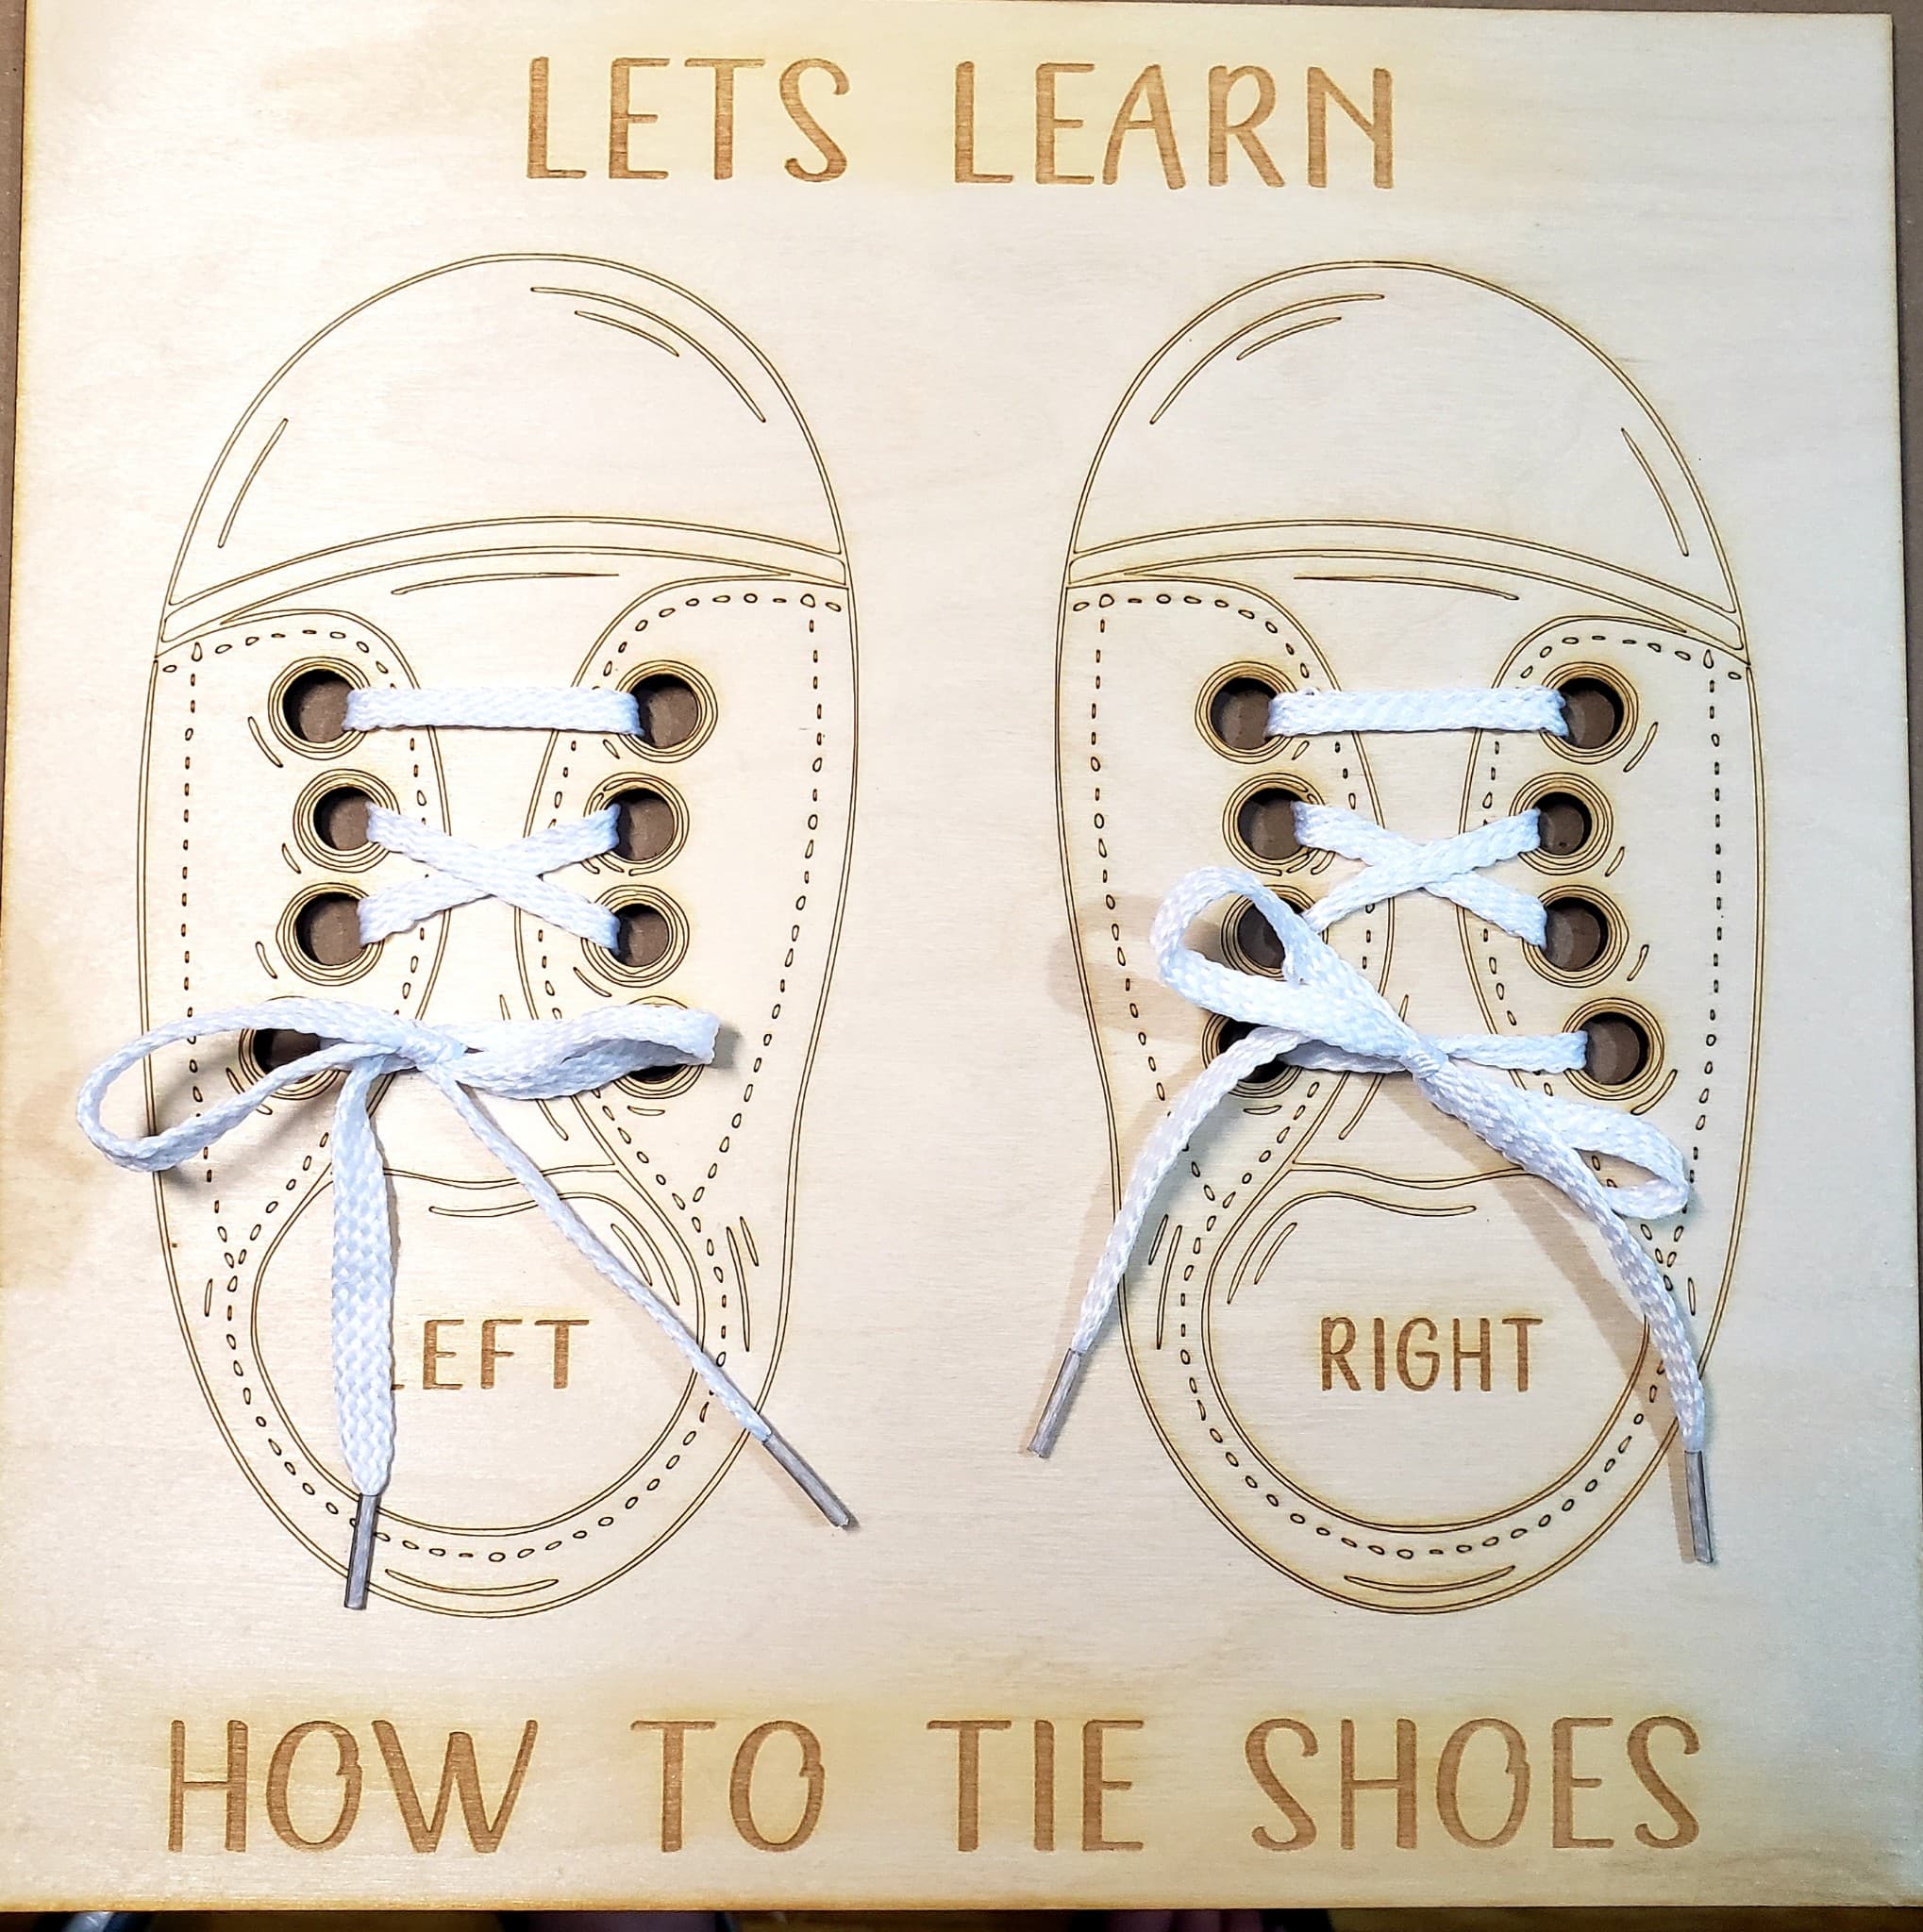 Help your child learn to tie their shoes with this laser-cut, 10.5" x 10.5" Birch Wood Board. It features both the left and right shoe and includes shoelaces for practice. The board is unpainted and unvarnished, so your child can even decorate their own perfect pair of shoes. Order today, and it will be ready to ship in 5-7 days.